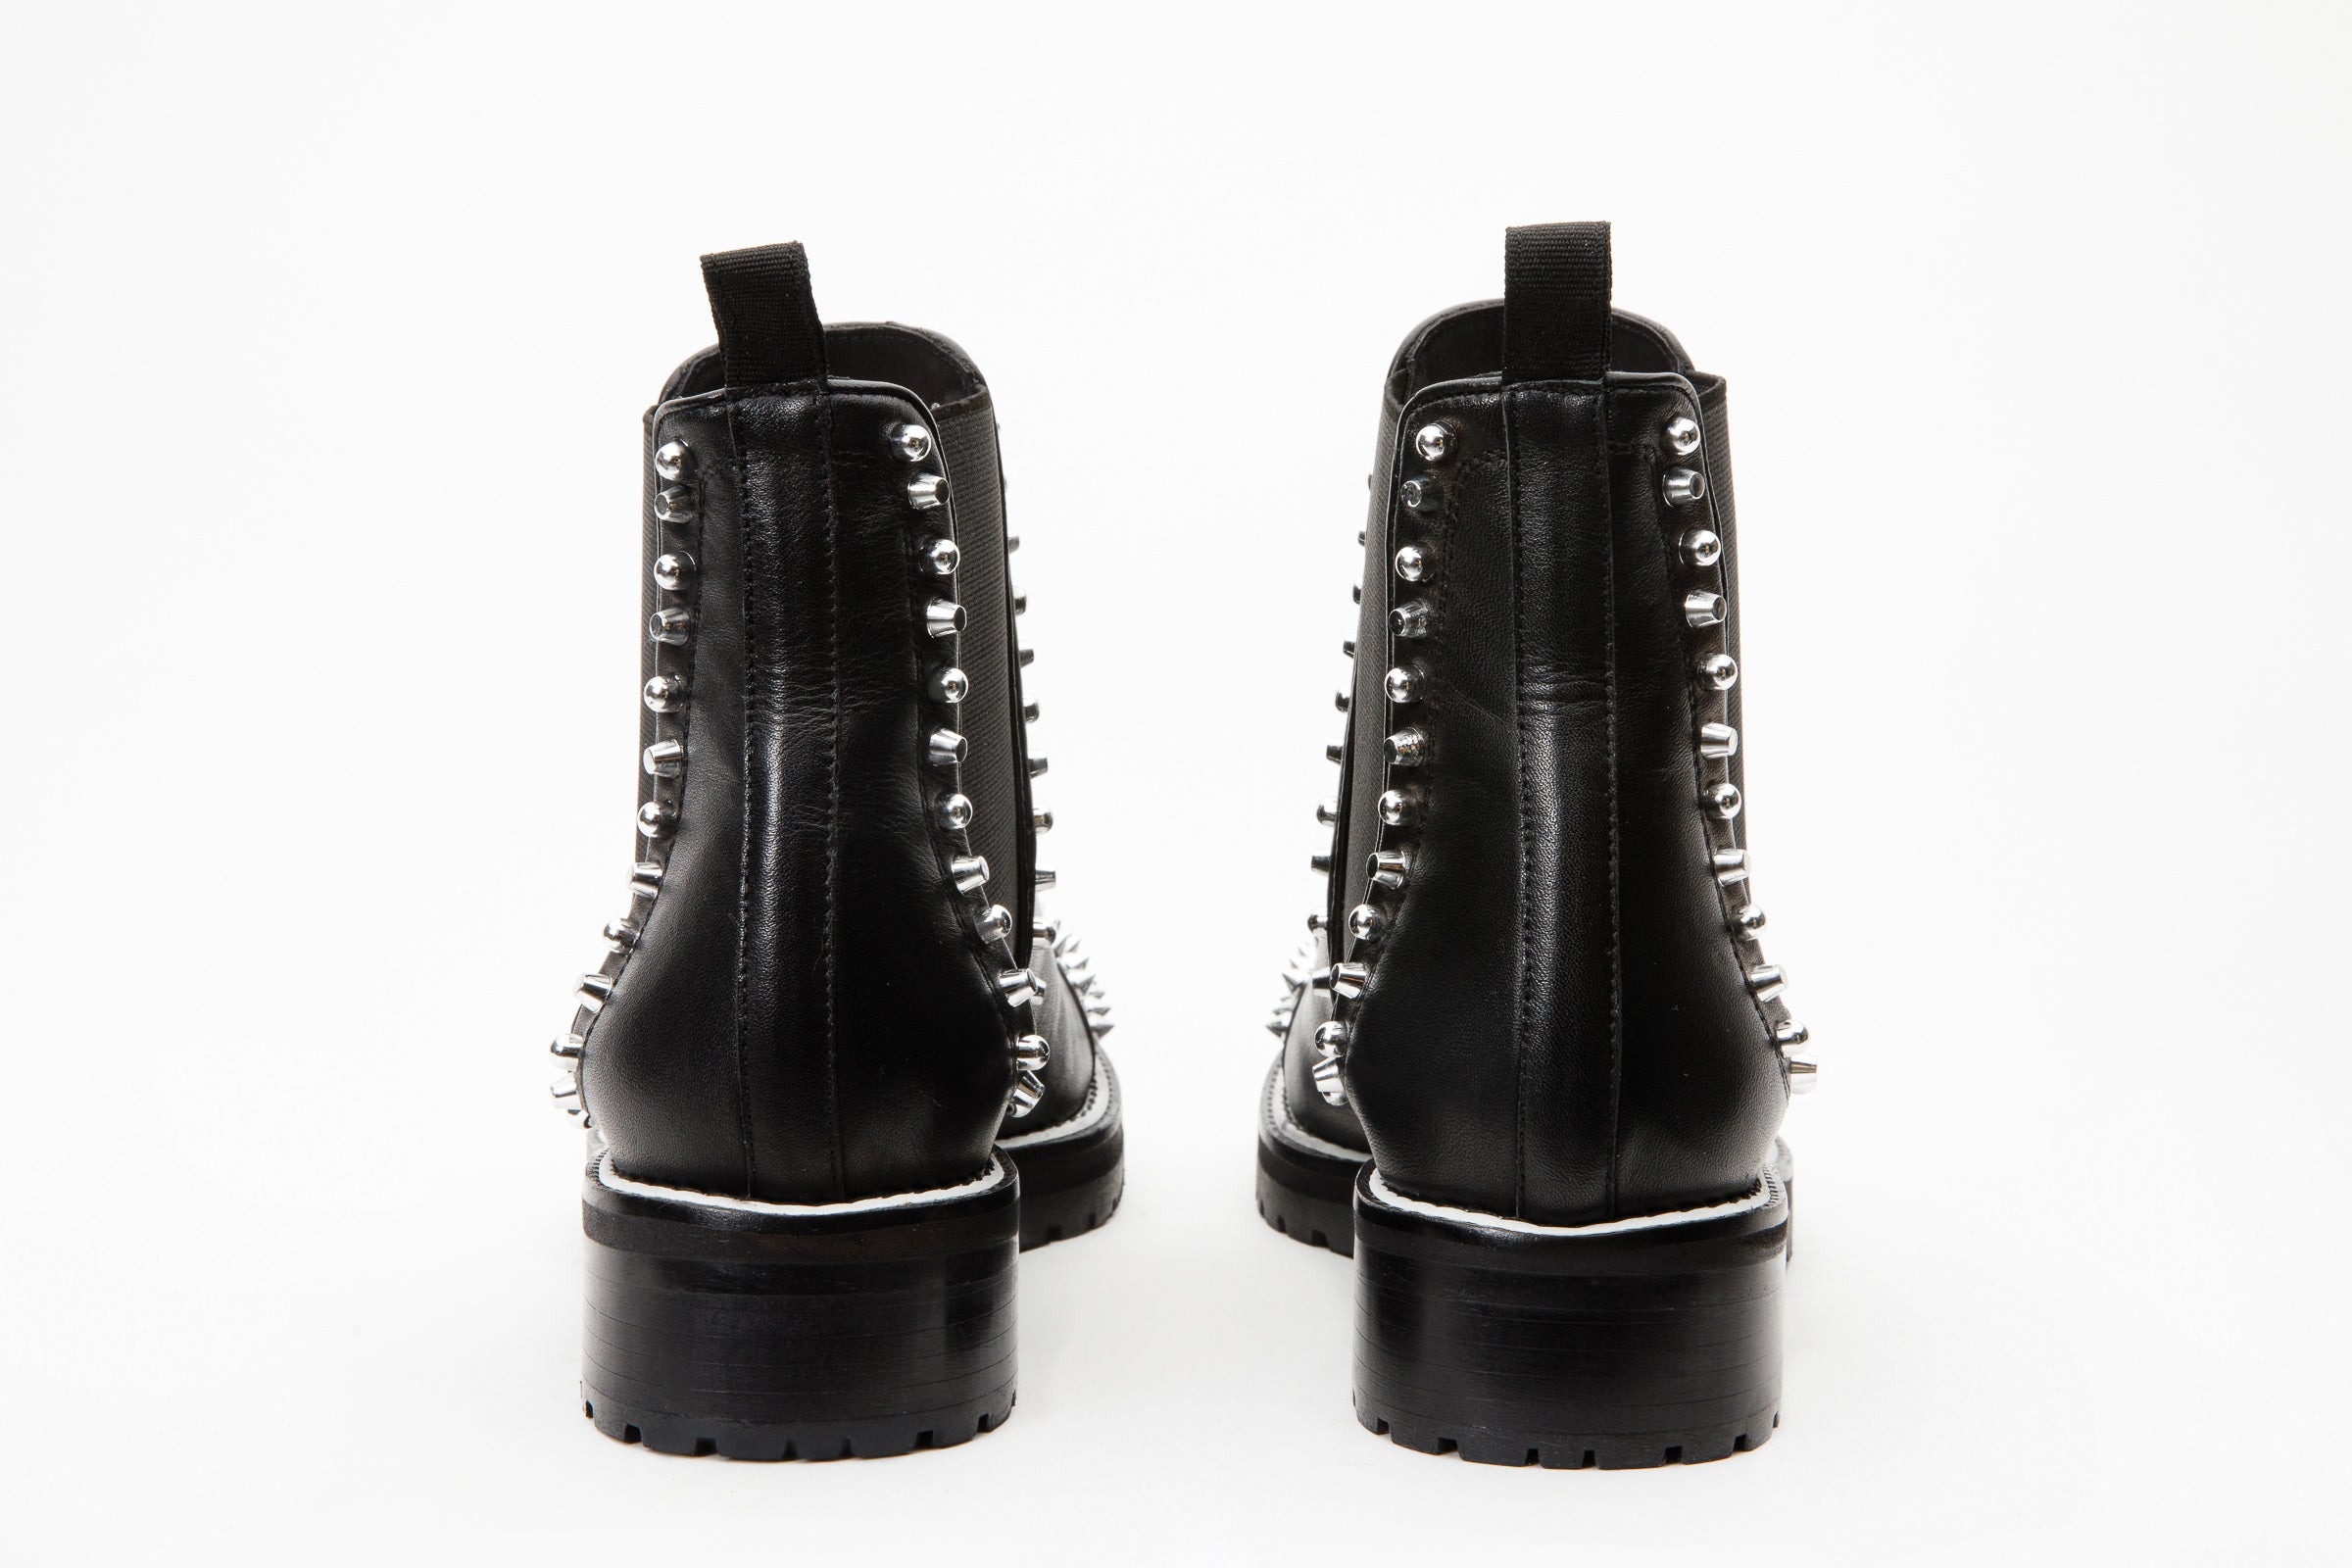 Sexy Lock Spike High Heel BALLET Ankle Boots For Women/Men Black Shiny  Fetish Birdies Shoes Customizable Plus Size Fast Shipping With DHL YYBM 032  From Shoemanufacturers, $72.87 | DHgate.Com